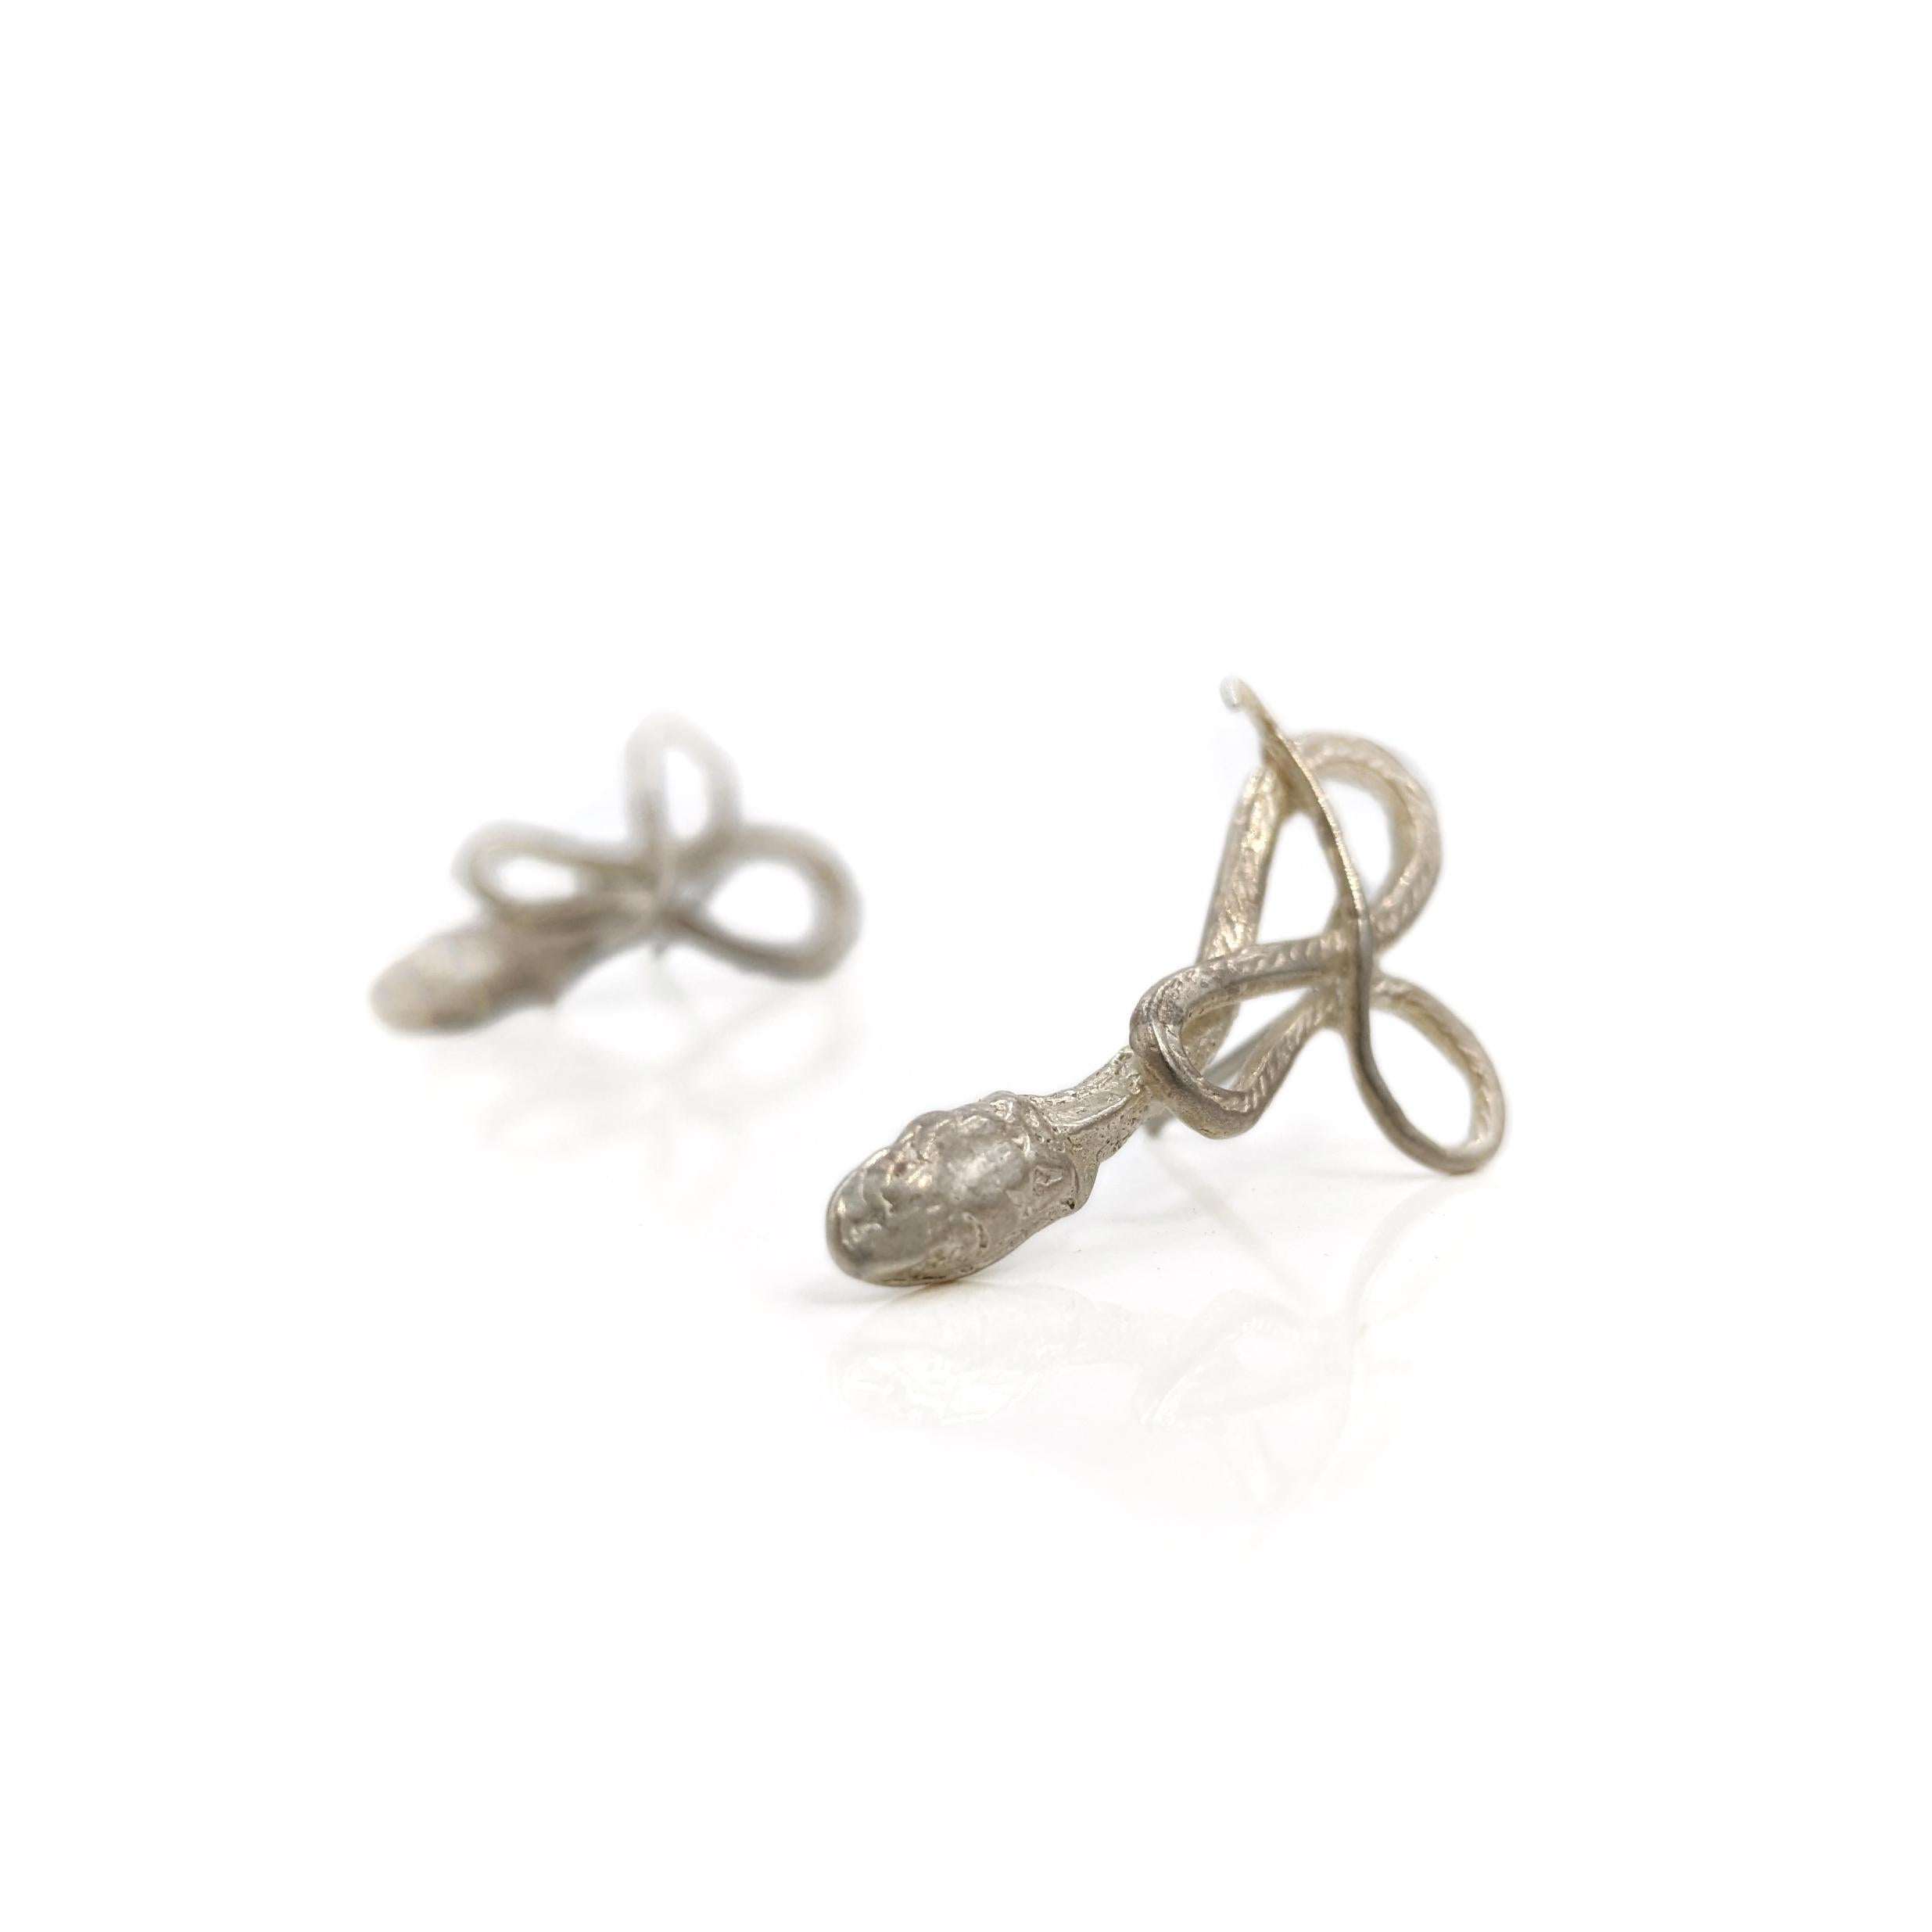 Artisan Small Silver Serpentine Earrings For Sale